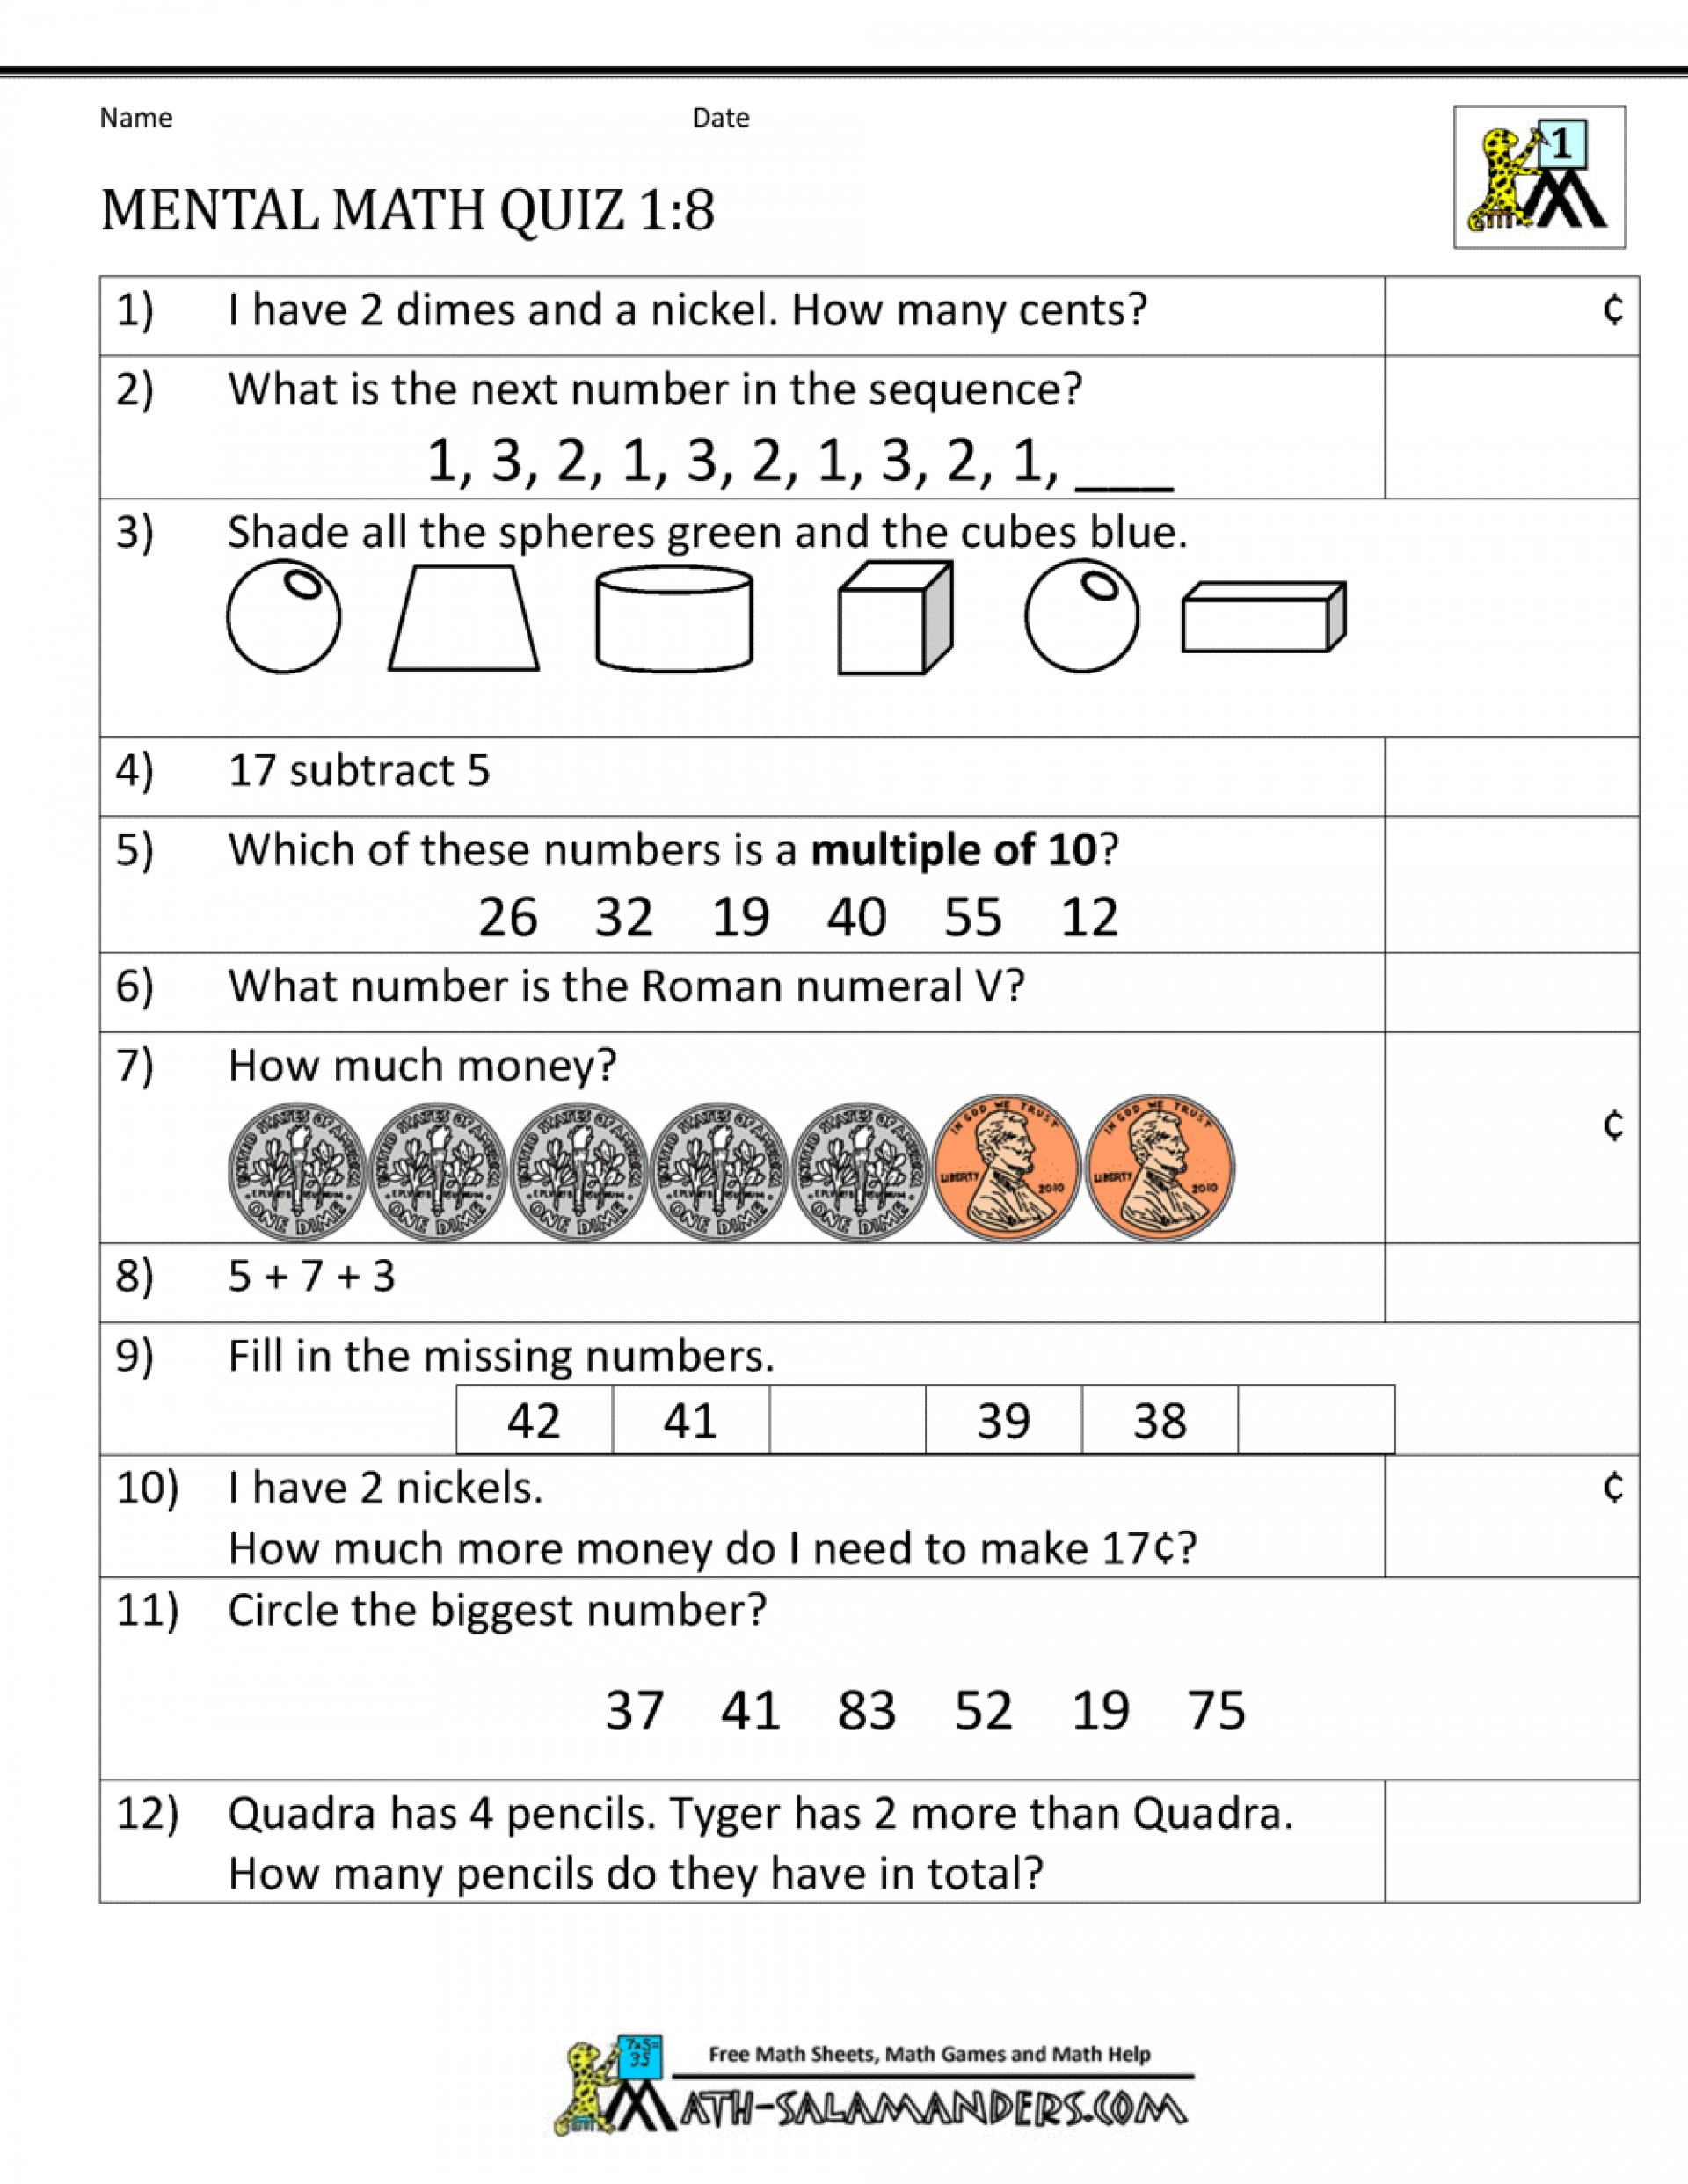 Free Math Worksheets First Grade 1 Counting Money Counting Money Pennies Nickels Dimes